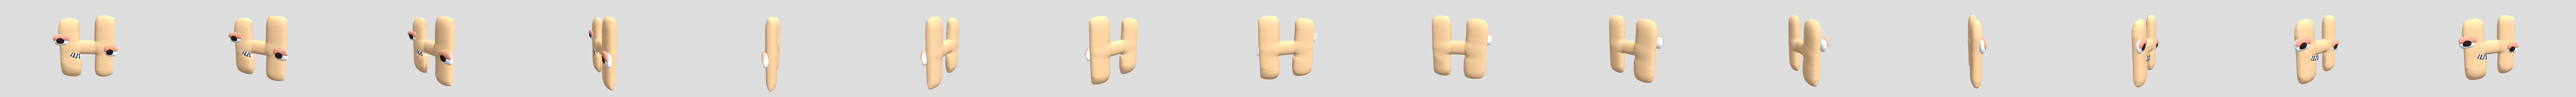 H (Russian Alphabet Lore) - Download Free 3D model by aniandronic